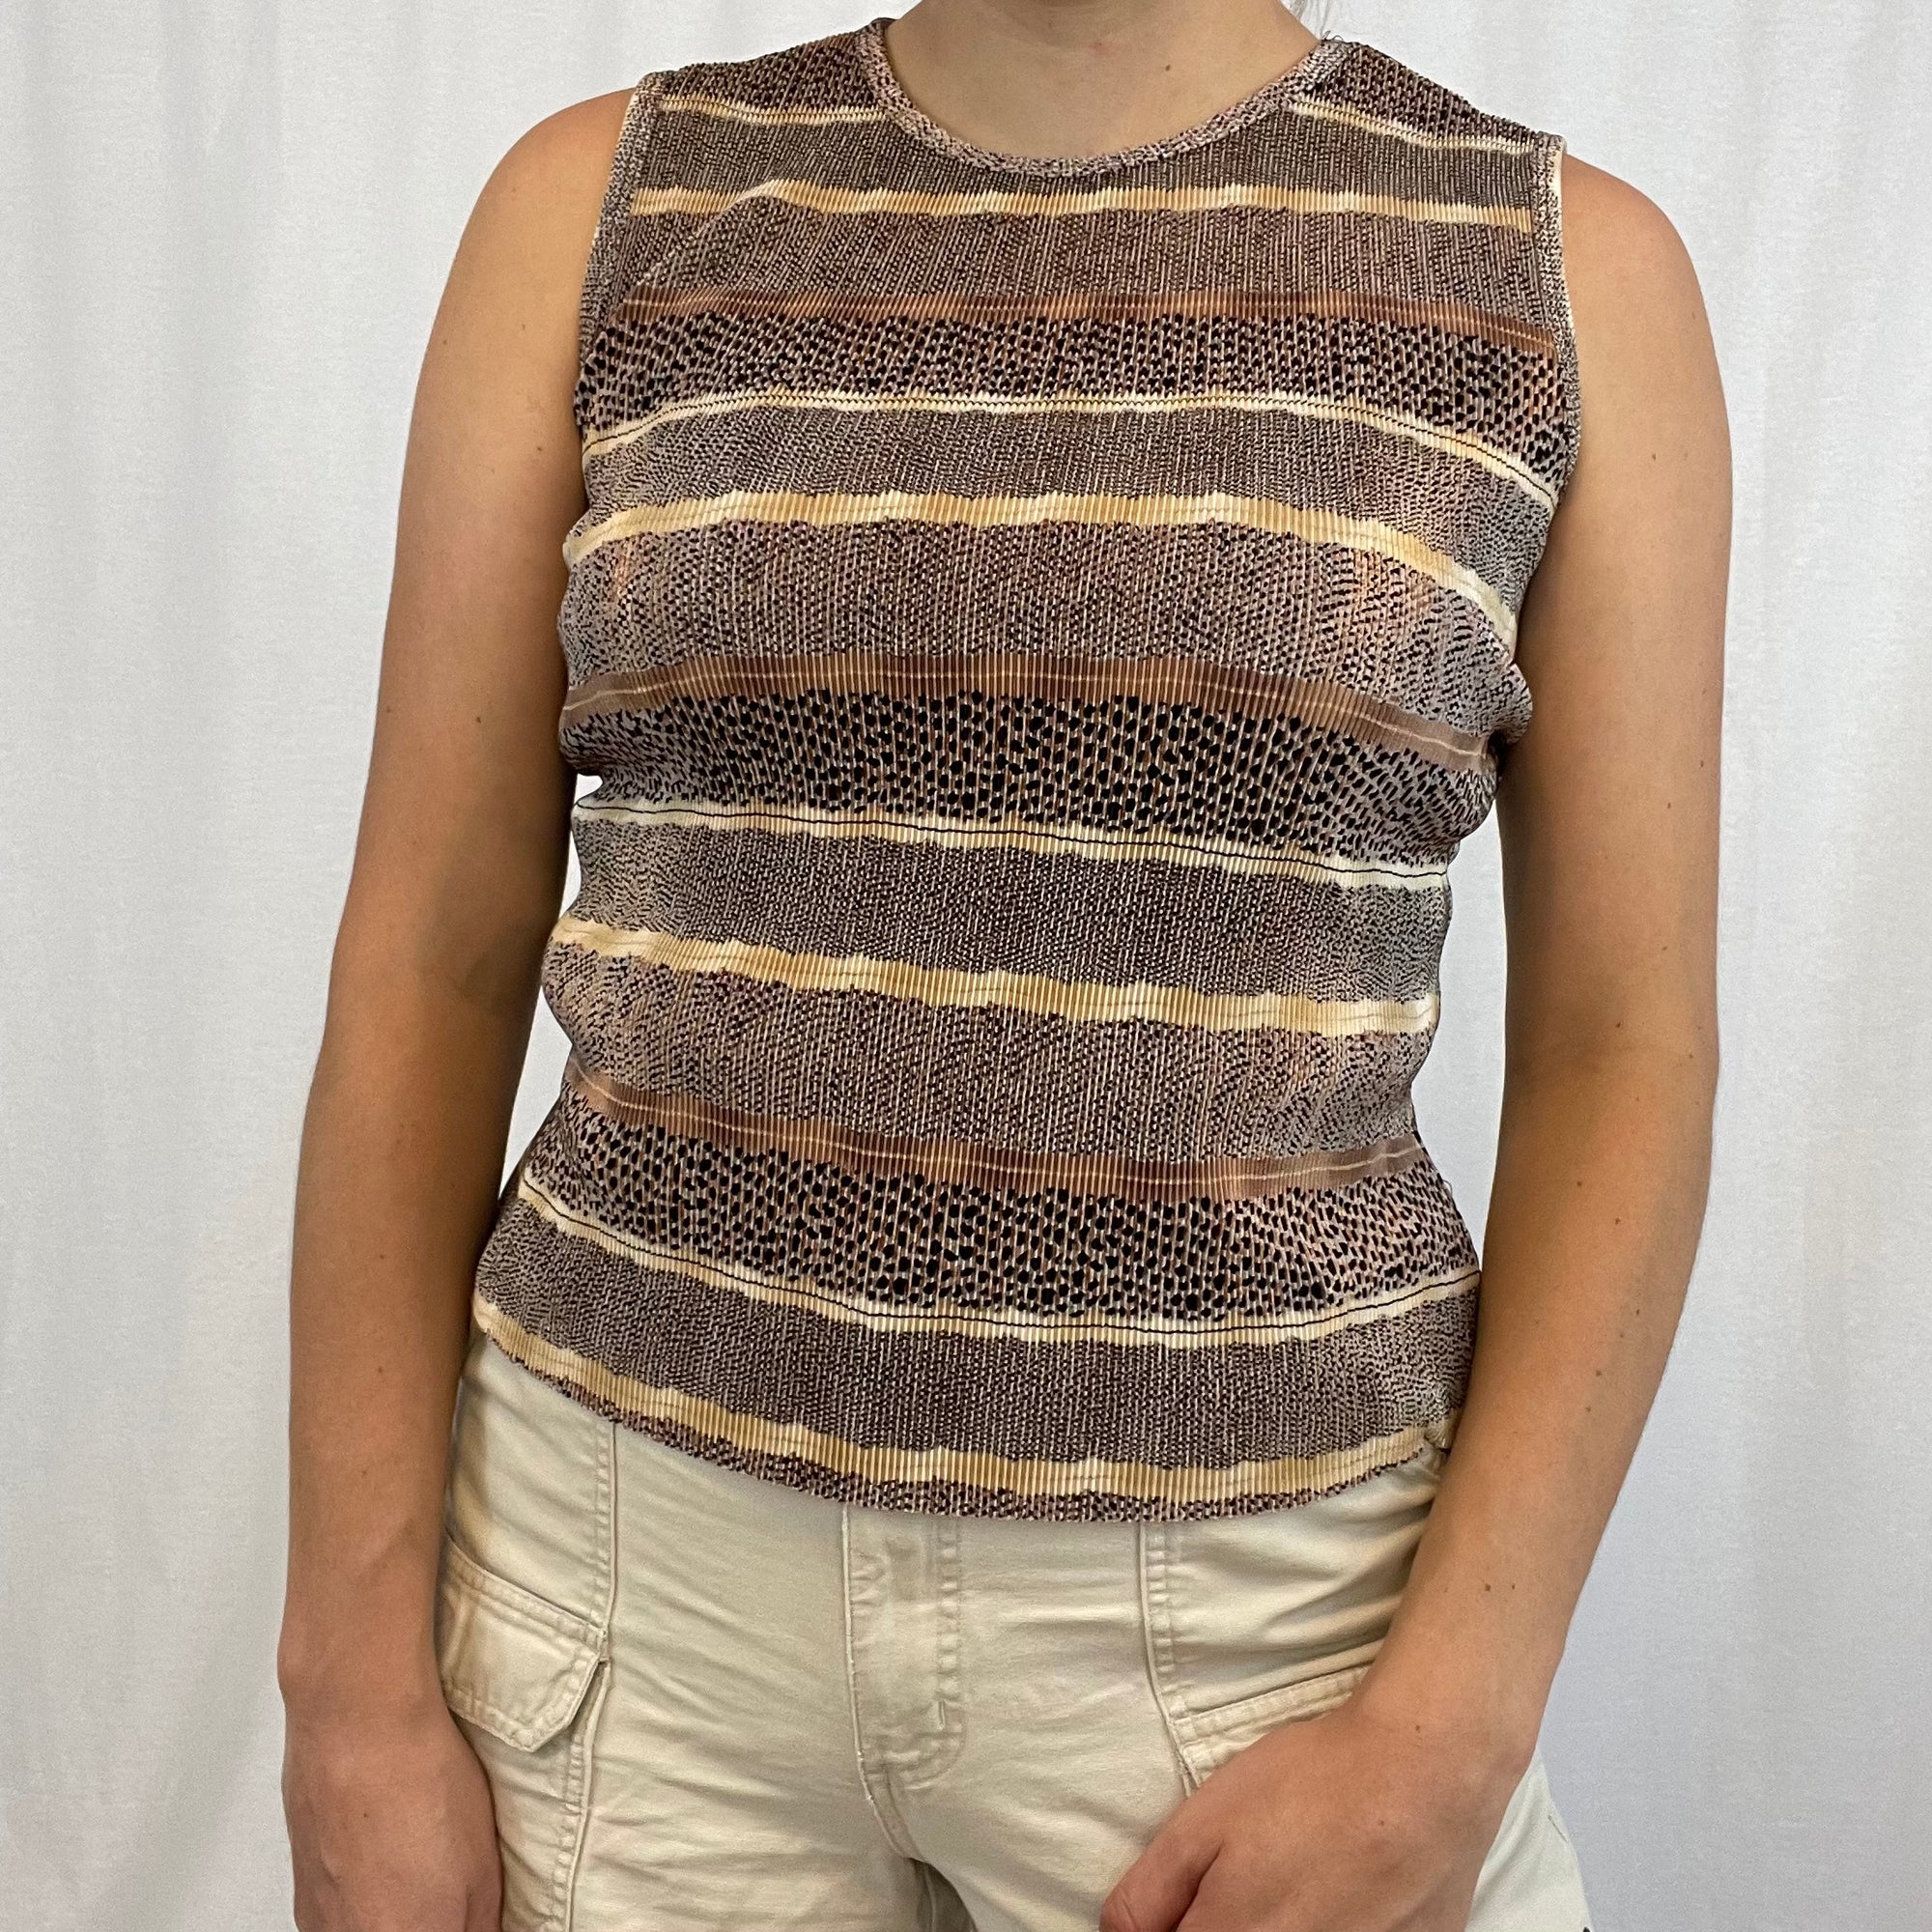 Vintage TESS Animal Striped Patterned Print Tank Top size Small